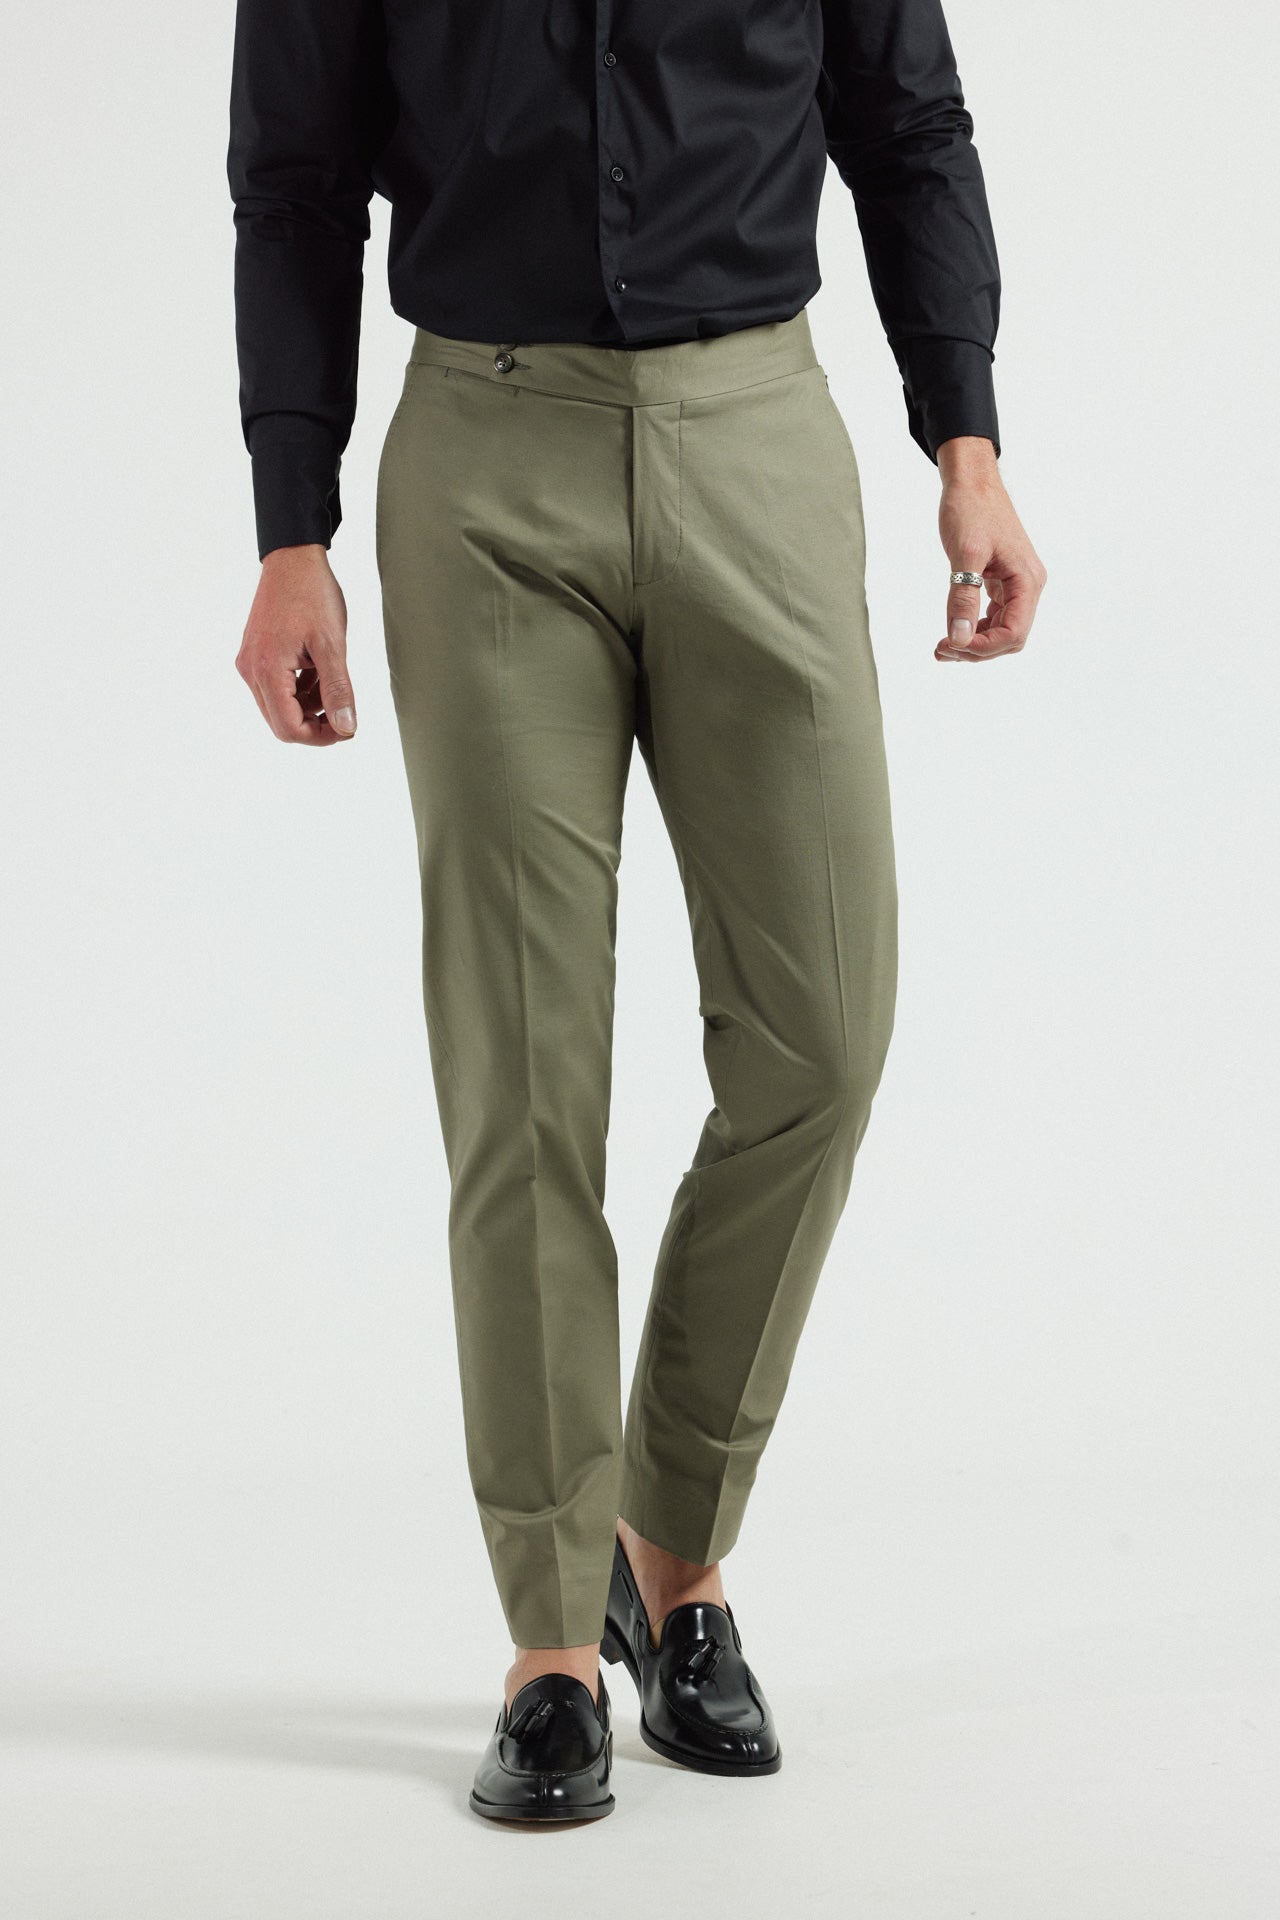 Buy Arrow Hudson Regular Fit Solid Formal Trousers - NNNOW.com